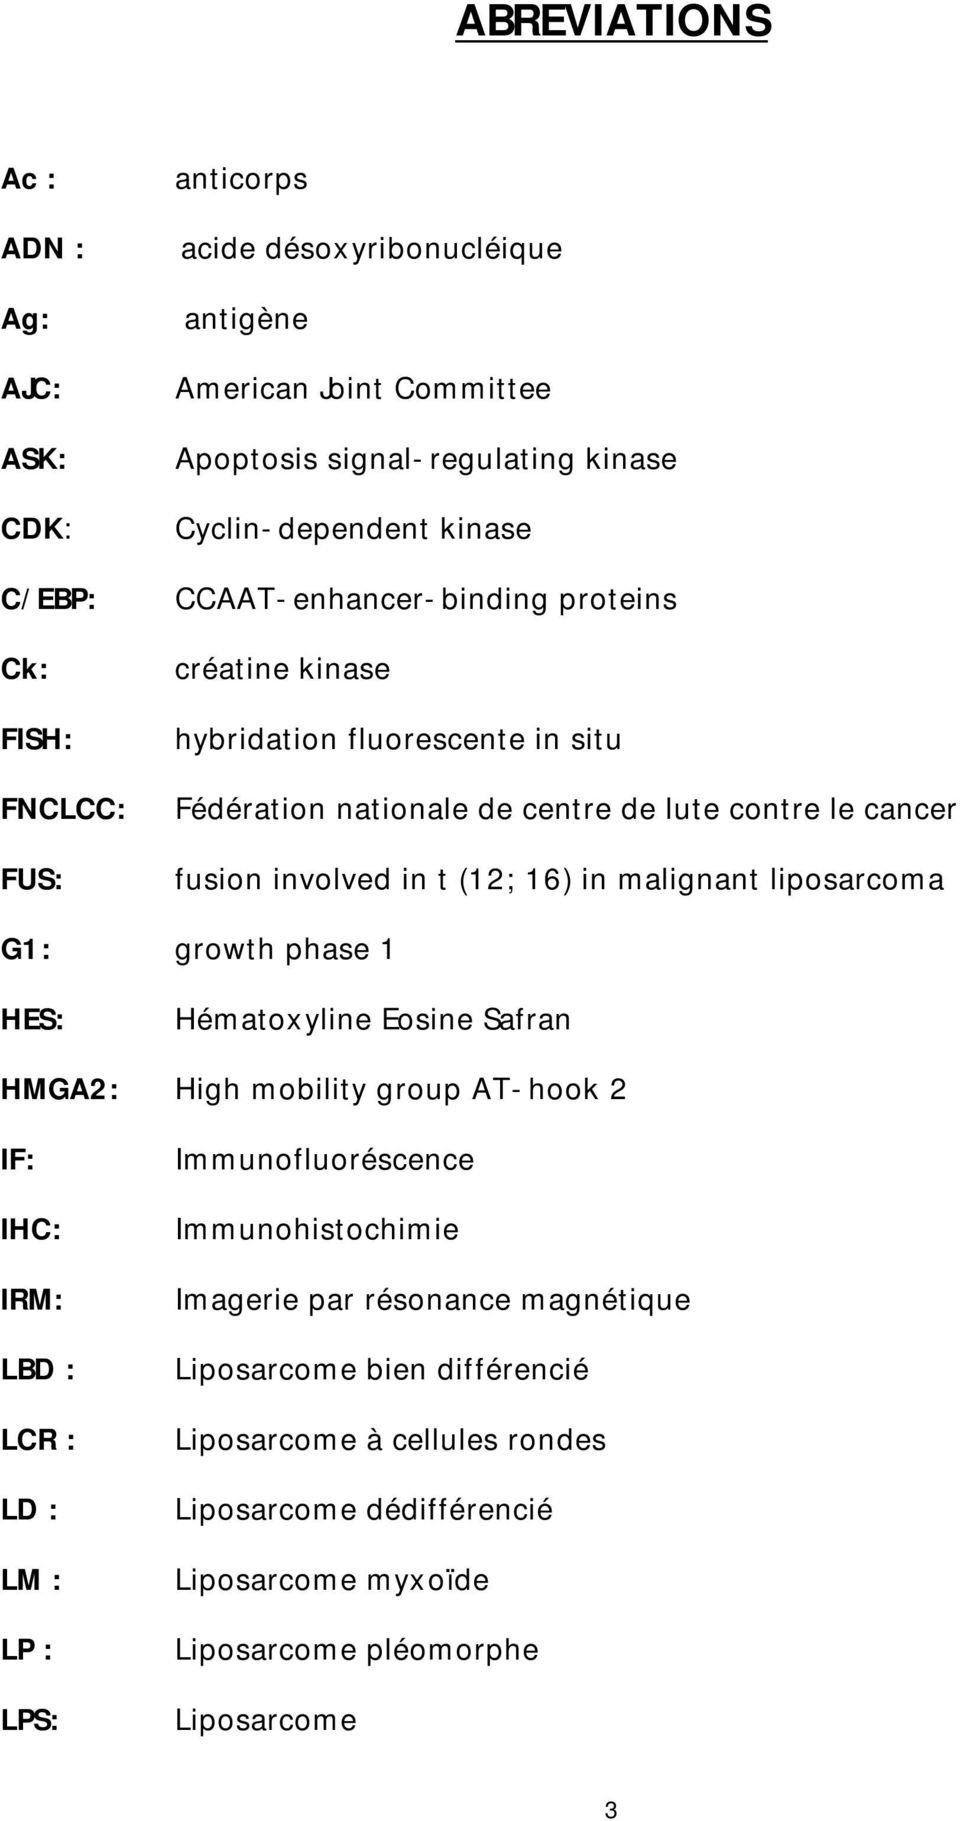 (12; 16) in malignant liposarcoma G1: growth phase 1 HES: Hématoxyline Eosine Safran HMGA2: High mobility group AT-hook 2 IF: IHC: IRM: LBD : LCR : LD : LM : LP : LPS: